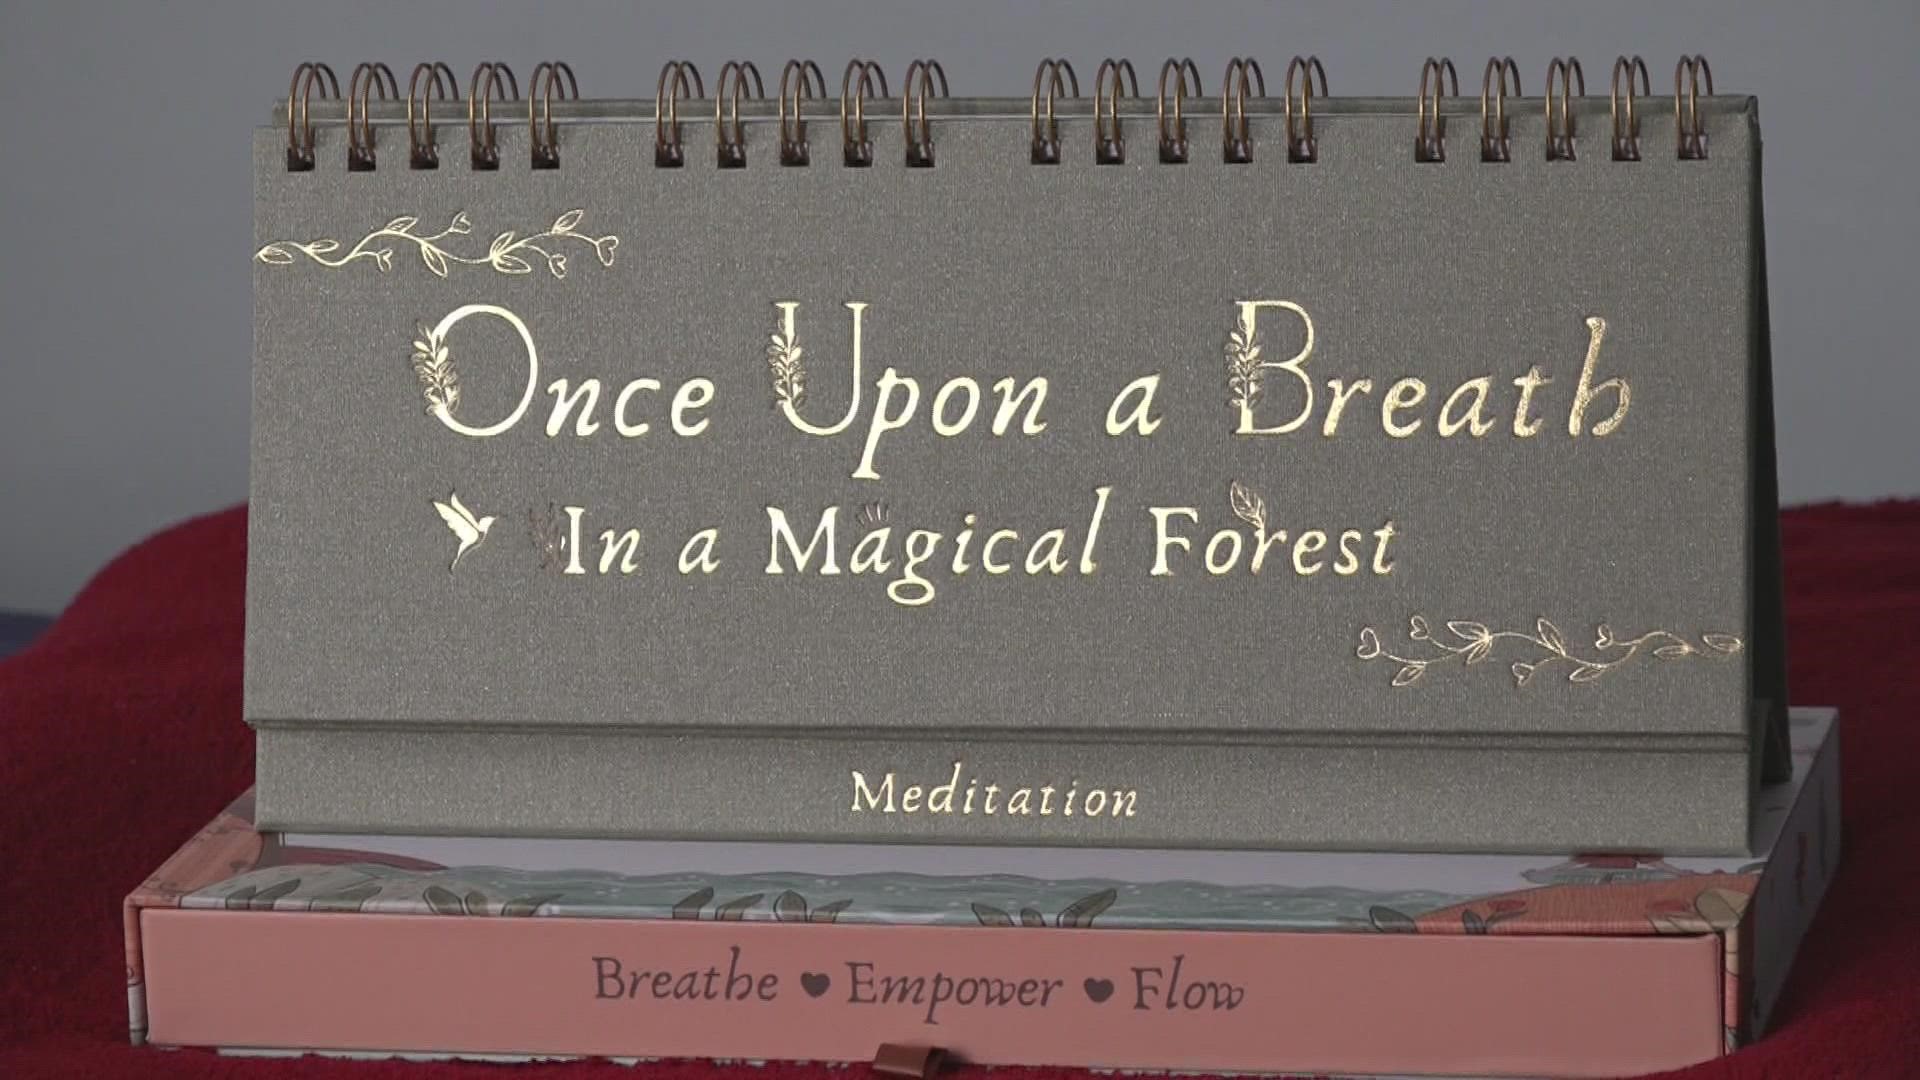 A woman from Kentwood helped write a flipbook meant to teach children mindfulness and meditation practices.